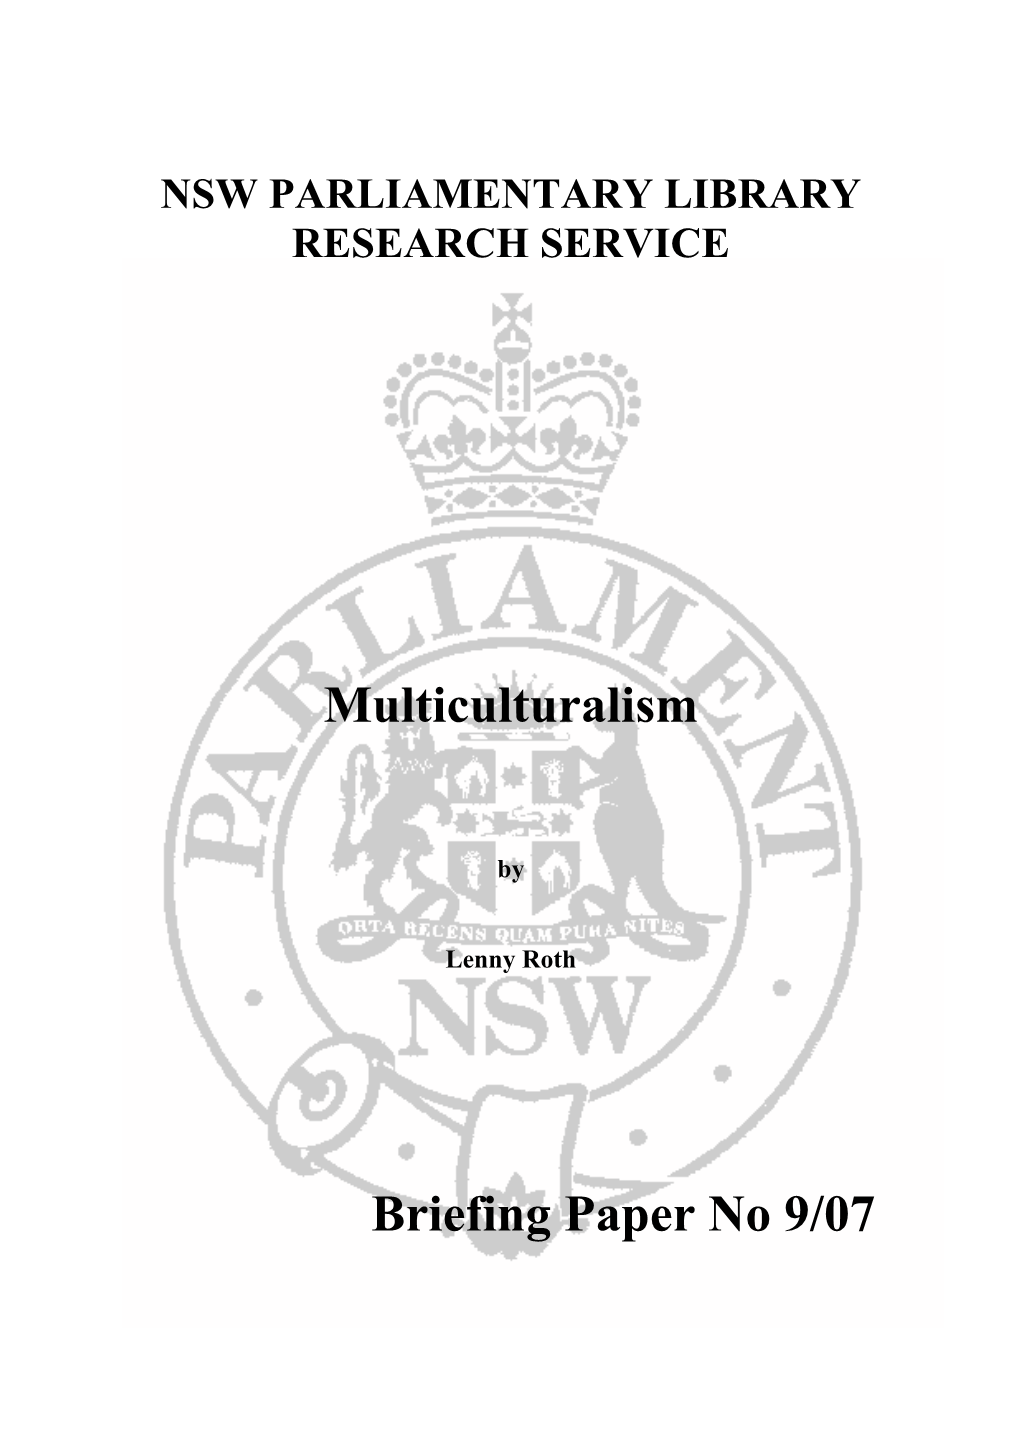 Download the Full Paper As